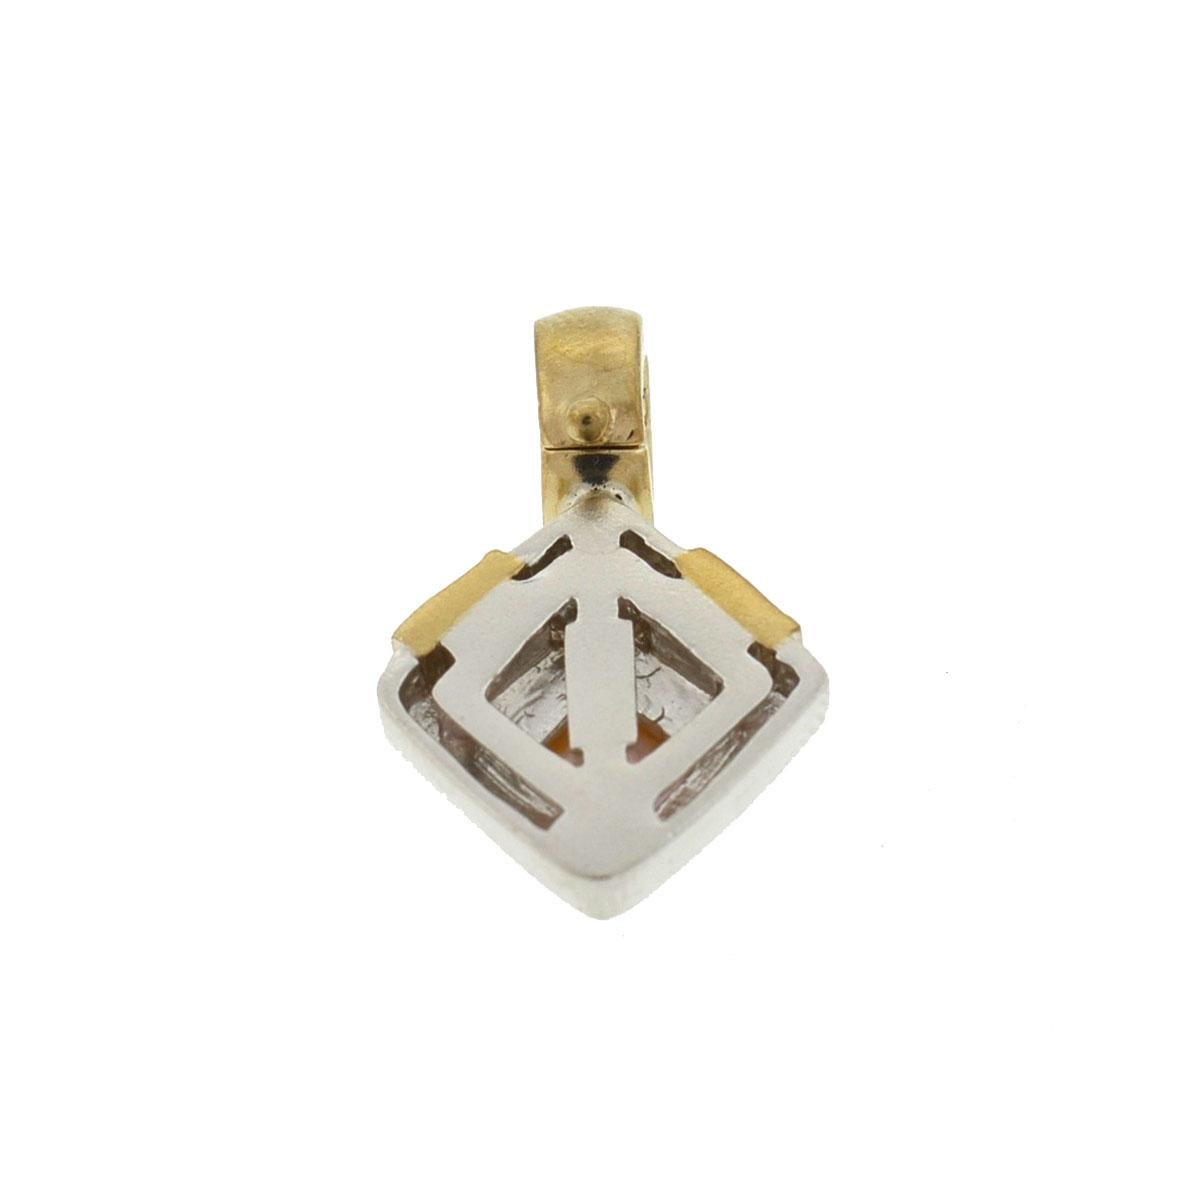 Company-N/A
Model- Pearl Diamond Pendant Approx .08 TCW
Metal -14k Two Tone
Size-16mm x 27mm H ( includes Bale)
Stones-Pearl/ Diamonds Approx .08 TCW
Includes-Pendant only
Weight-4.96 grams
Sku-8679-6AM